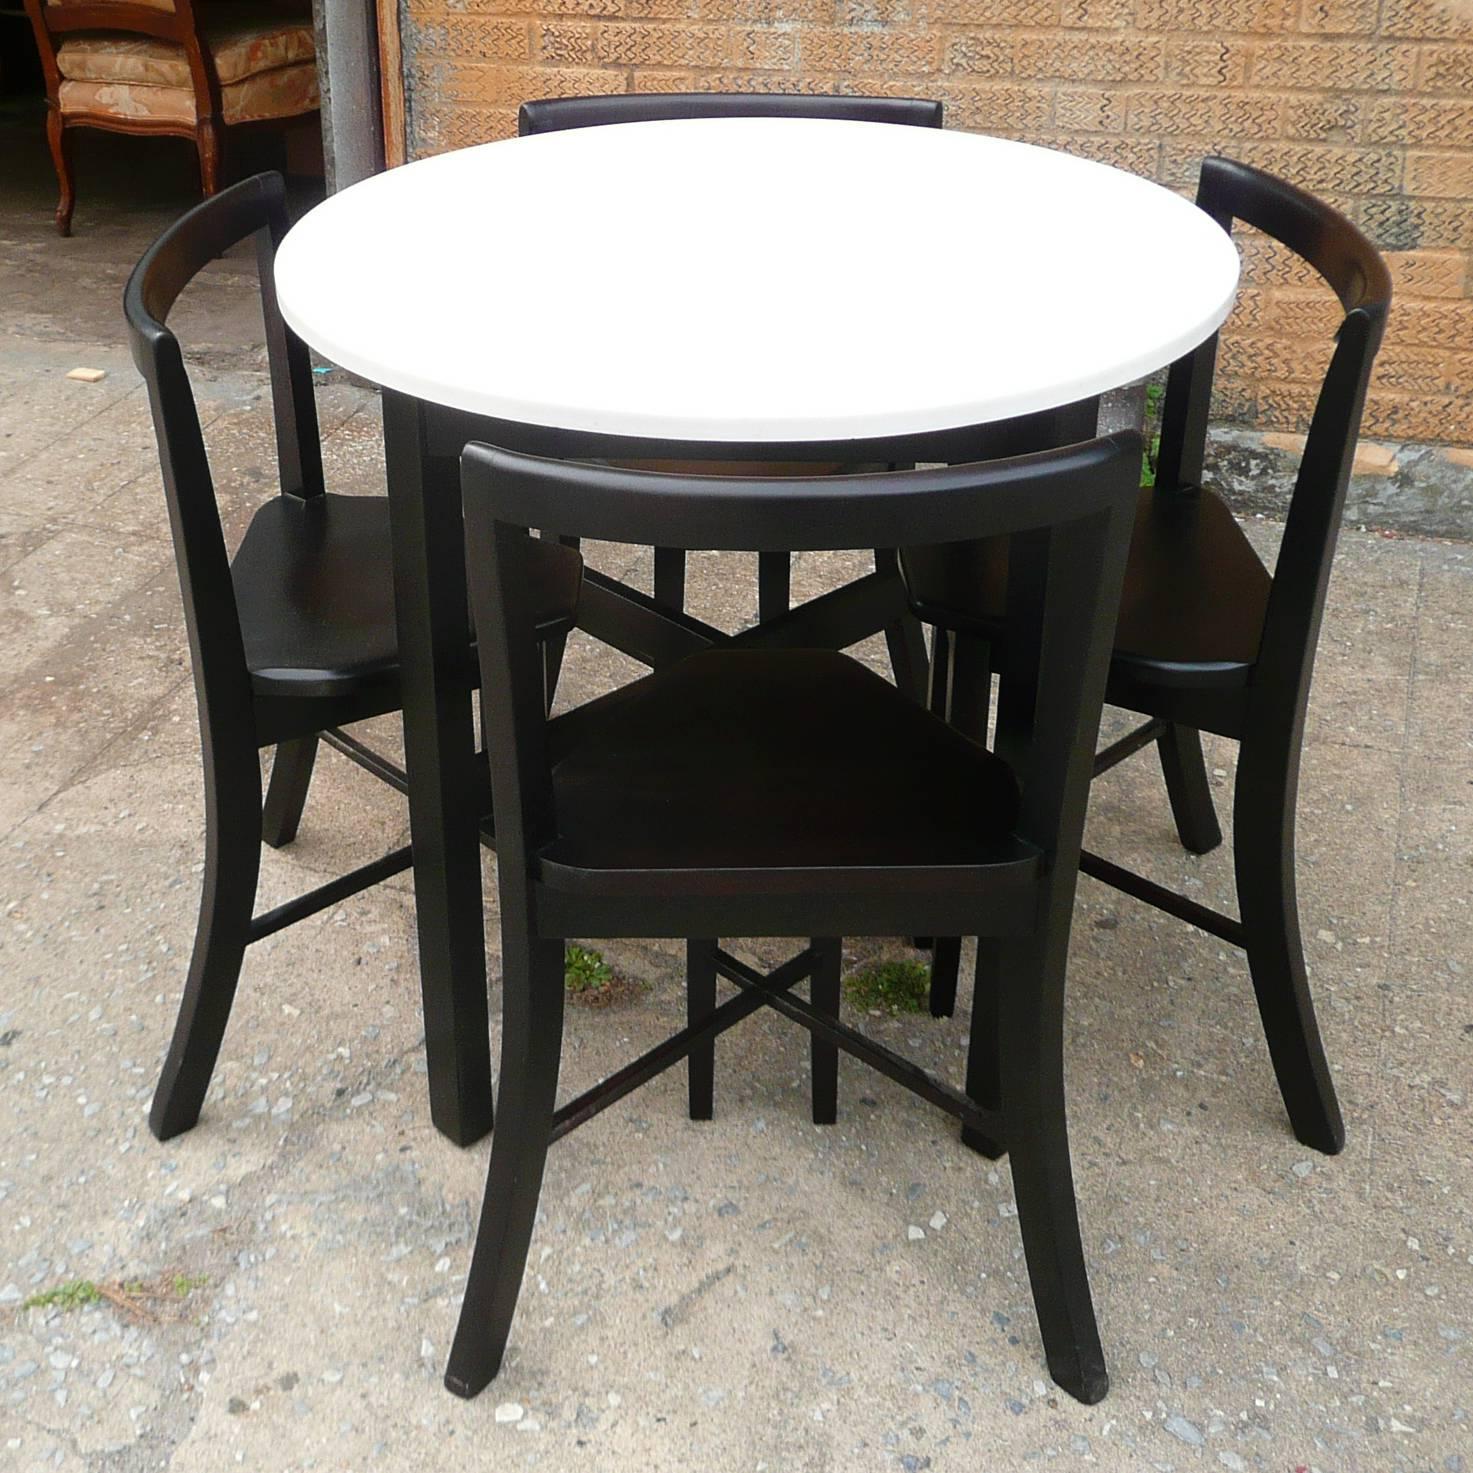 1940s, round dining set includes table with white Vitrolite glass top and black lacquered wood frame and 4 matching wood chairs that contour to fit the table

Table: 31